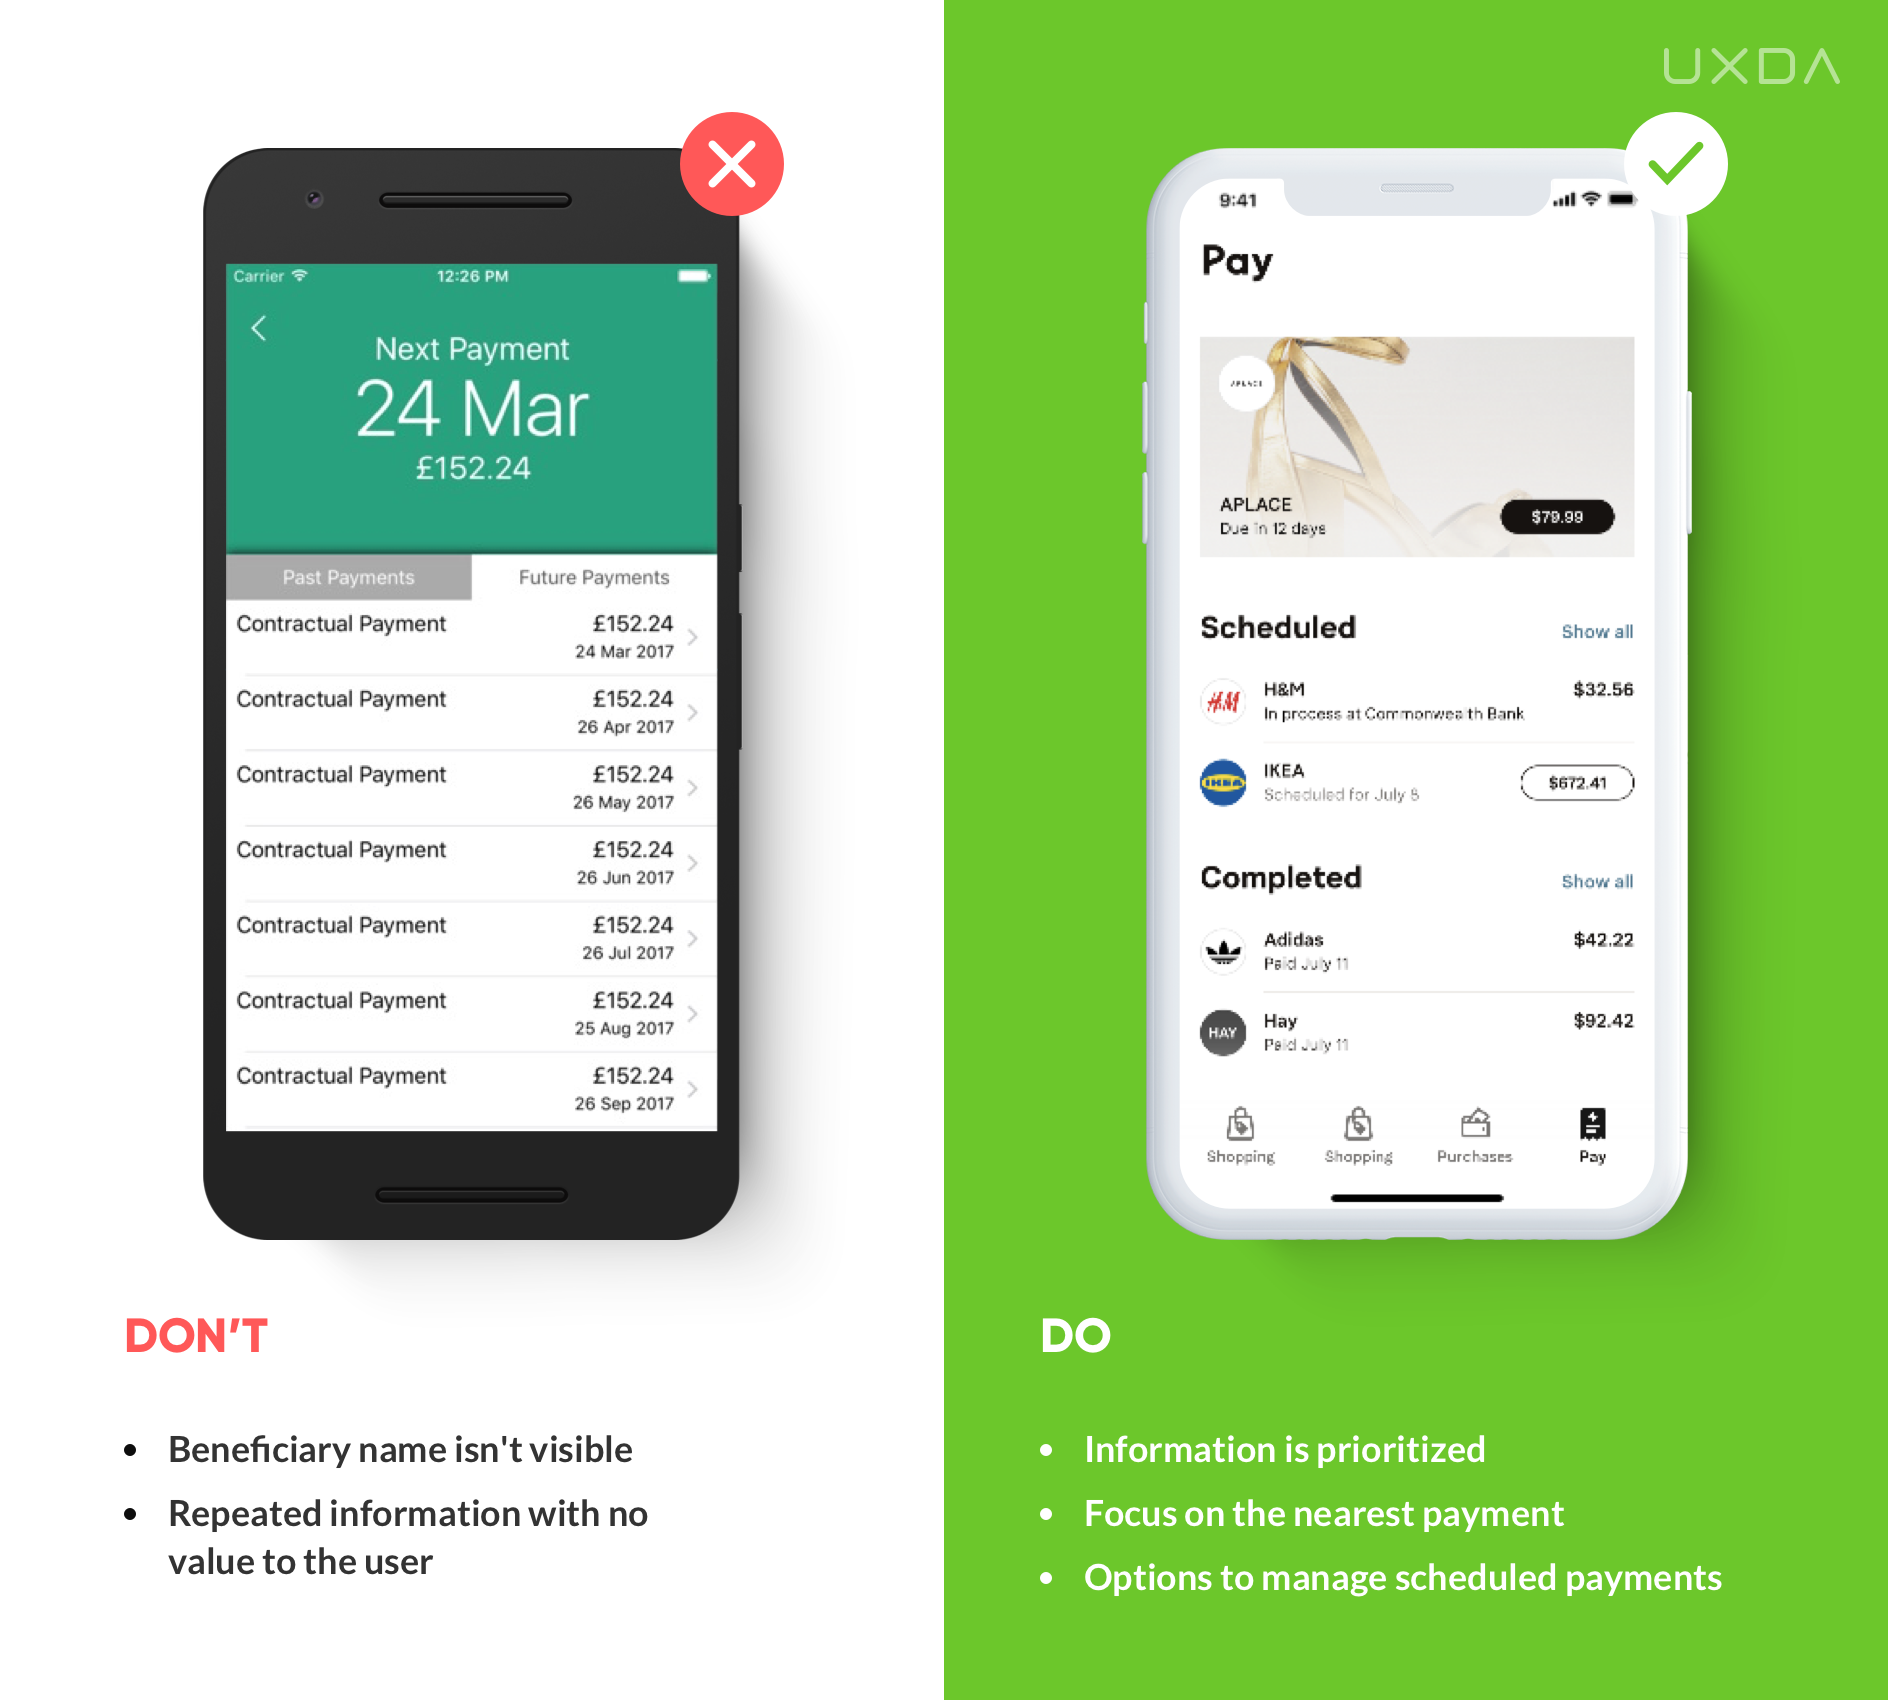 Fintech UX / UI Guide: TOP 20 Tips to Improve Mobile Banking Solutions Design - Scheduled payments